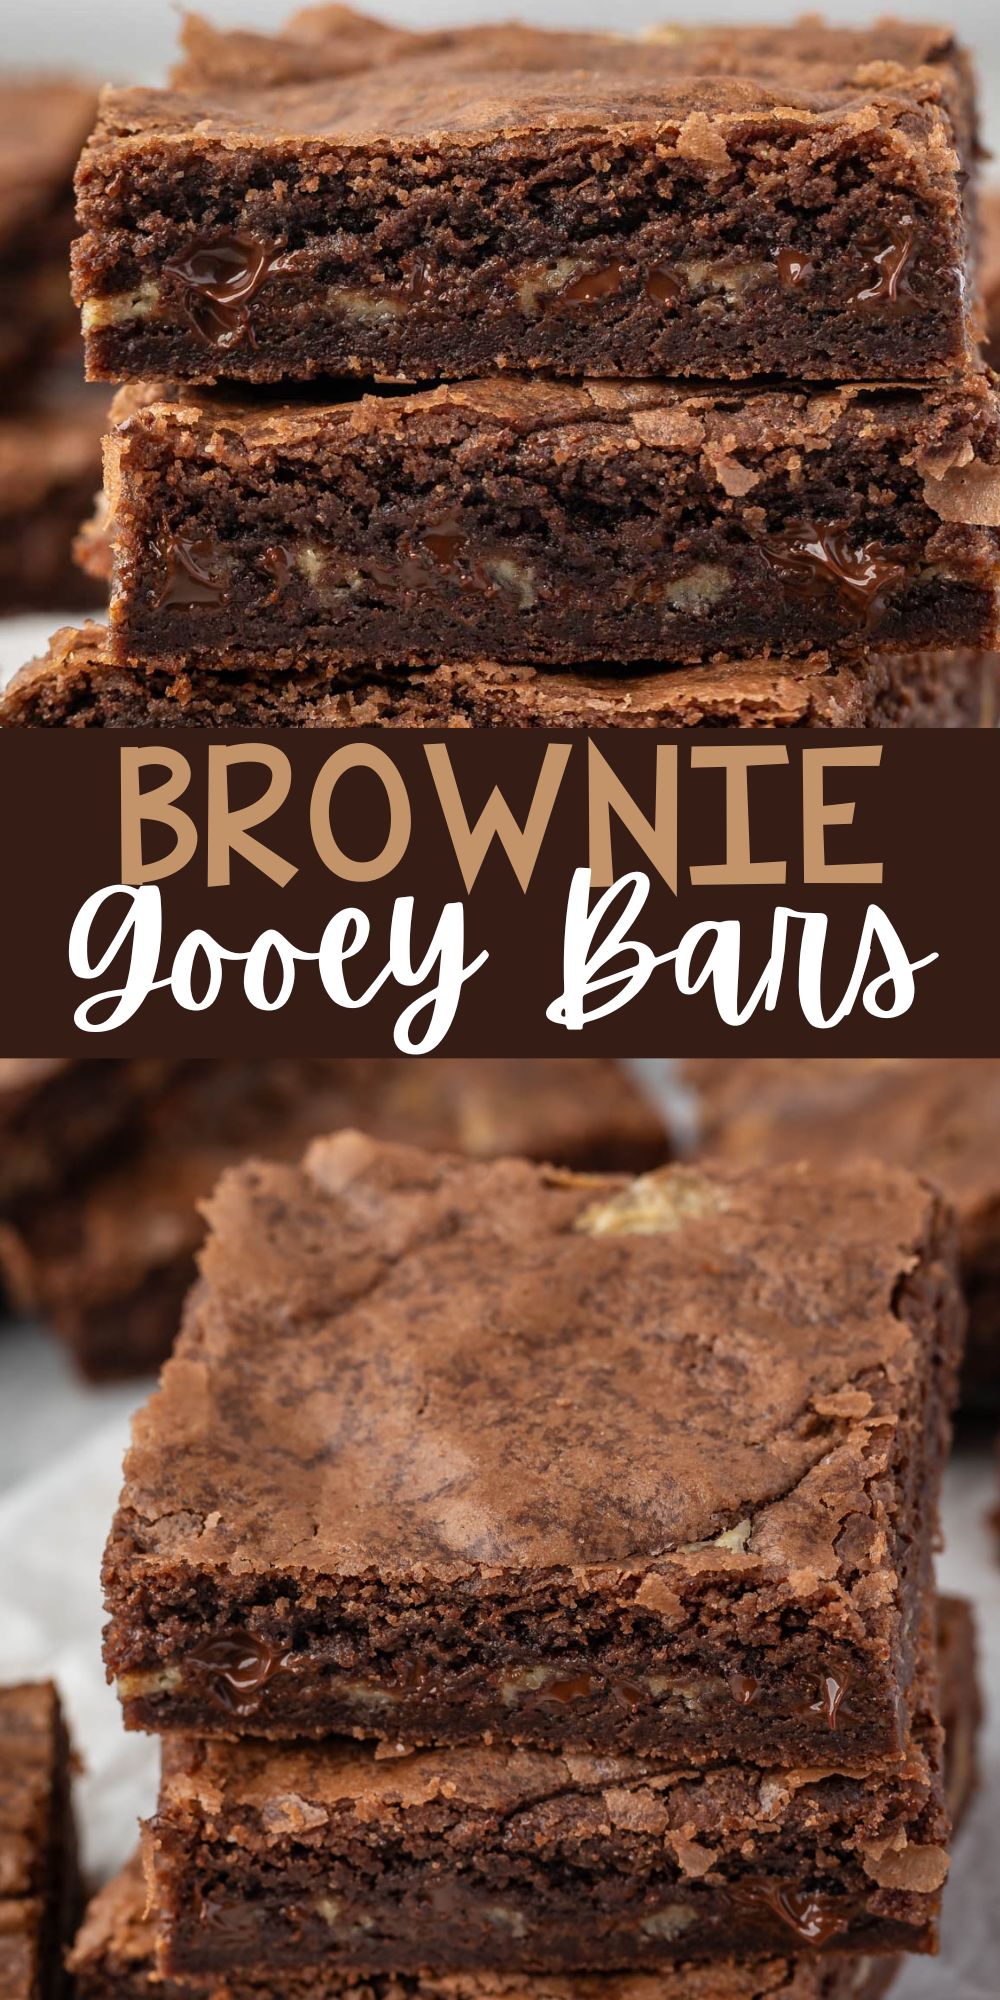 two photos of stacked brownies with chocolate chips baked in with words on the image.